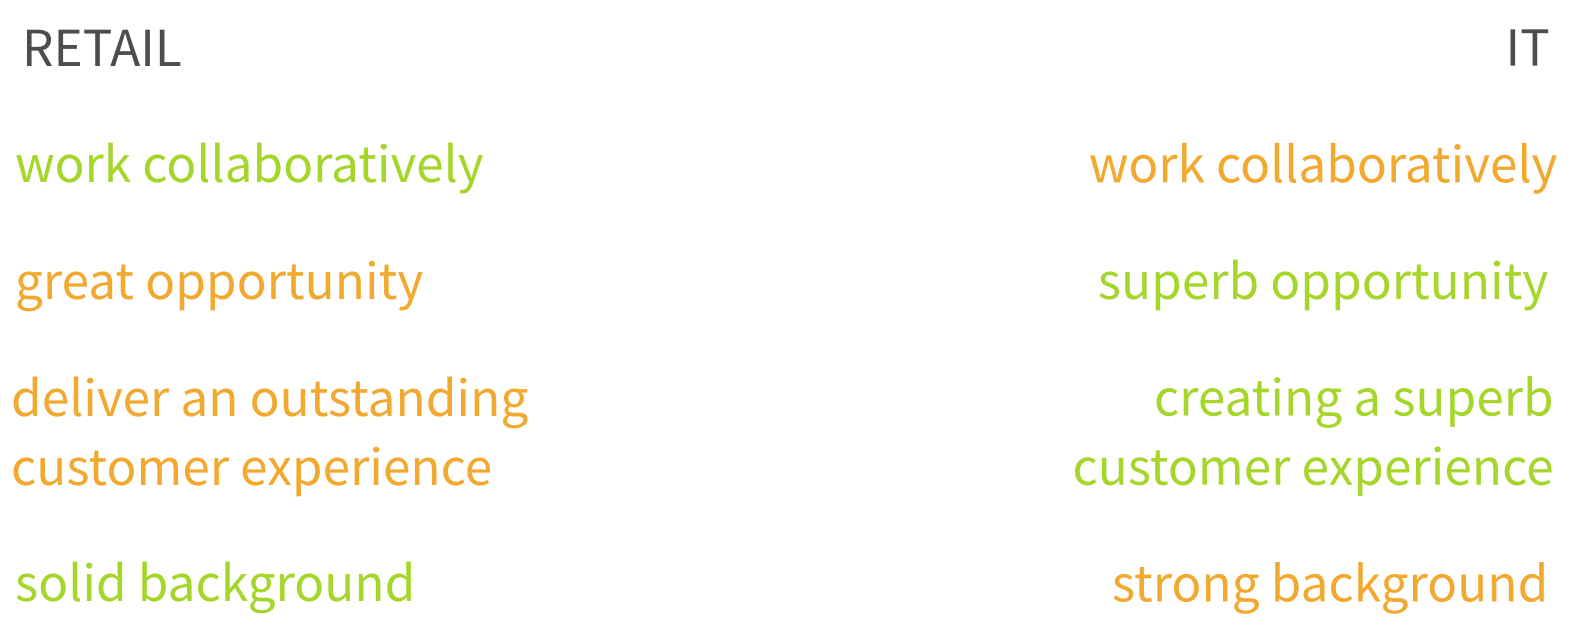 The same list of phrases duplicated in two columns, the first column for retail the second for IT. The list includes work collaboratively, great opportunity, deliver an outstanding customer experience, solid background. The left column is color coded green, orange, orange, green. The right column is colored orange, green, green and orange. 